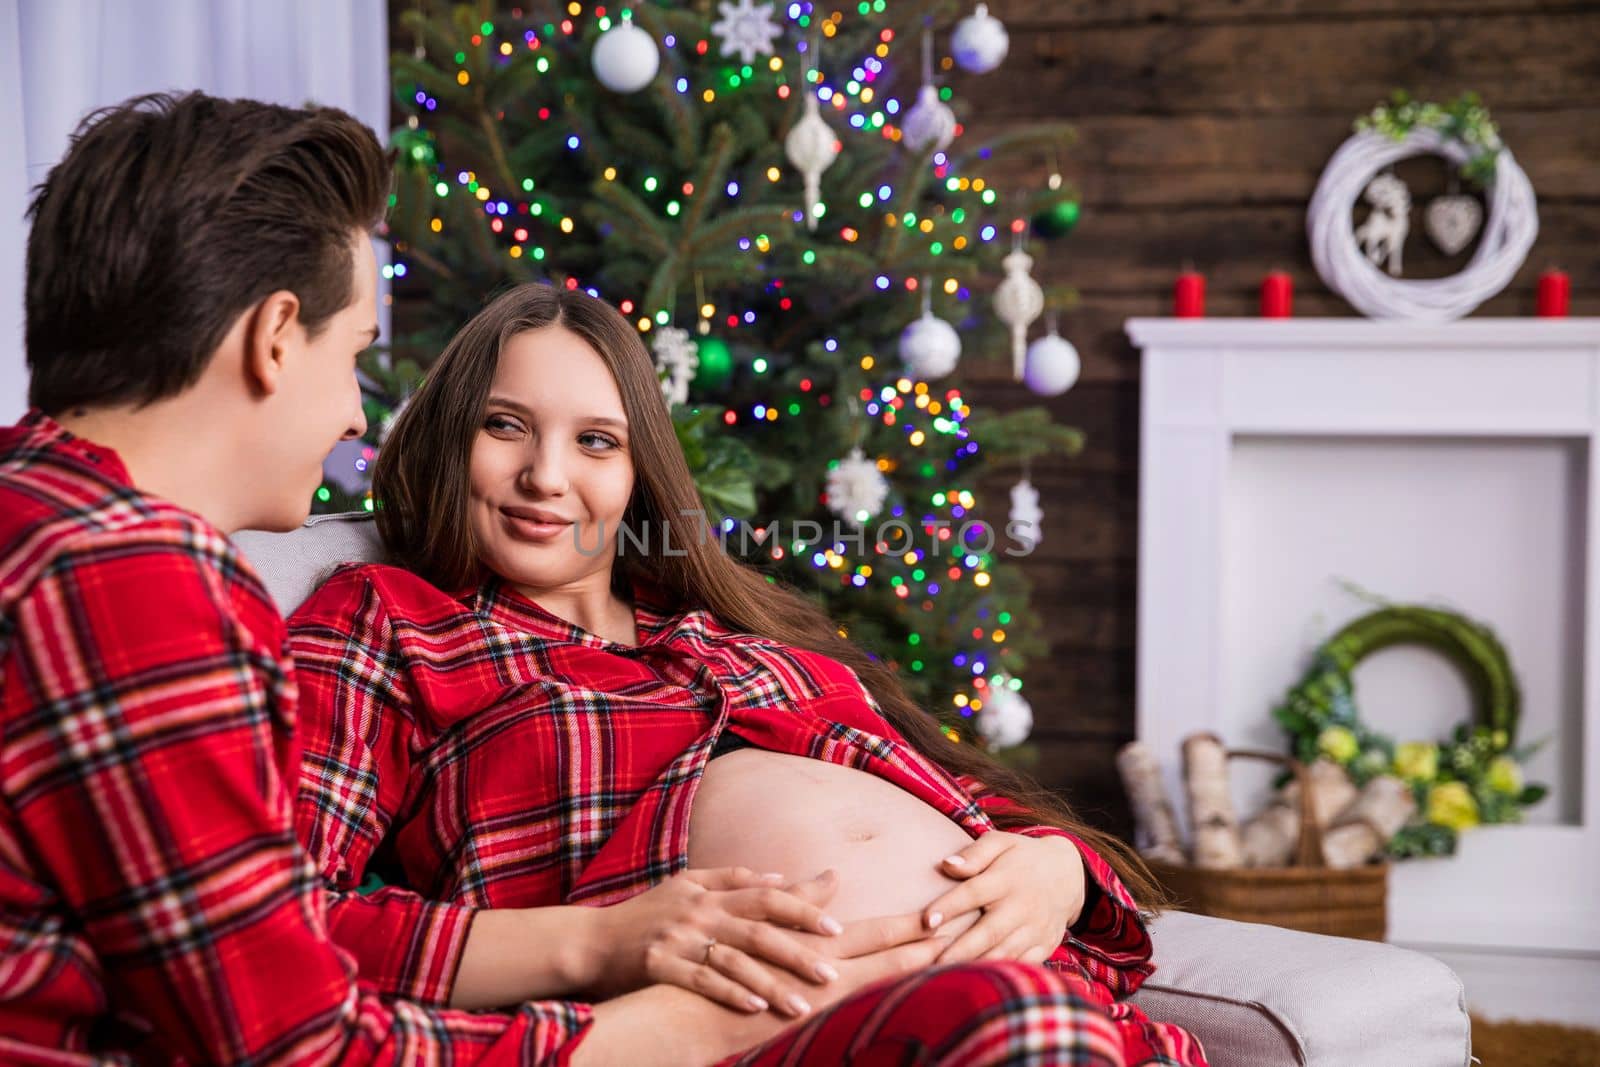 A pregnant woman sits next to her husband and smiles. In the background is a blurry dressed Christmas tree. The mother-to-be keeps her hands on her exposed pregnant belly.